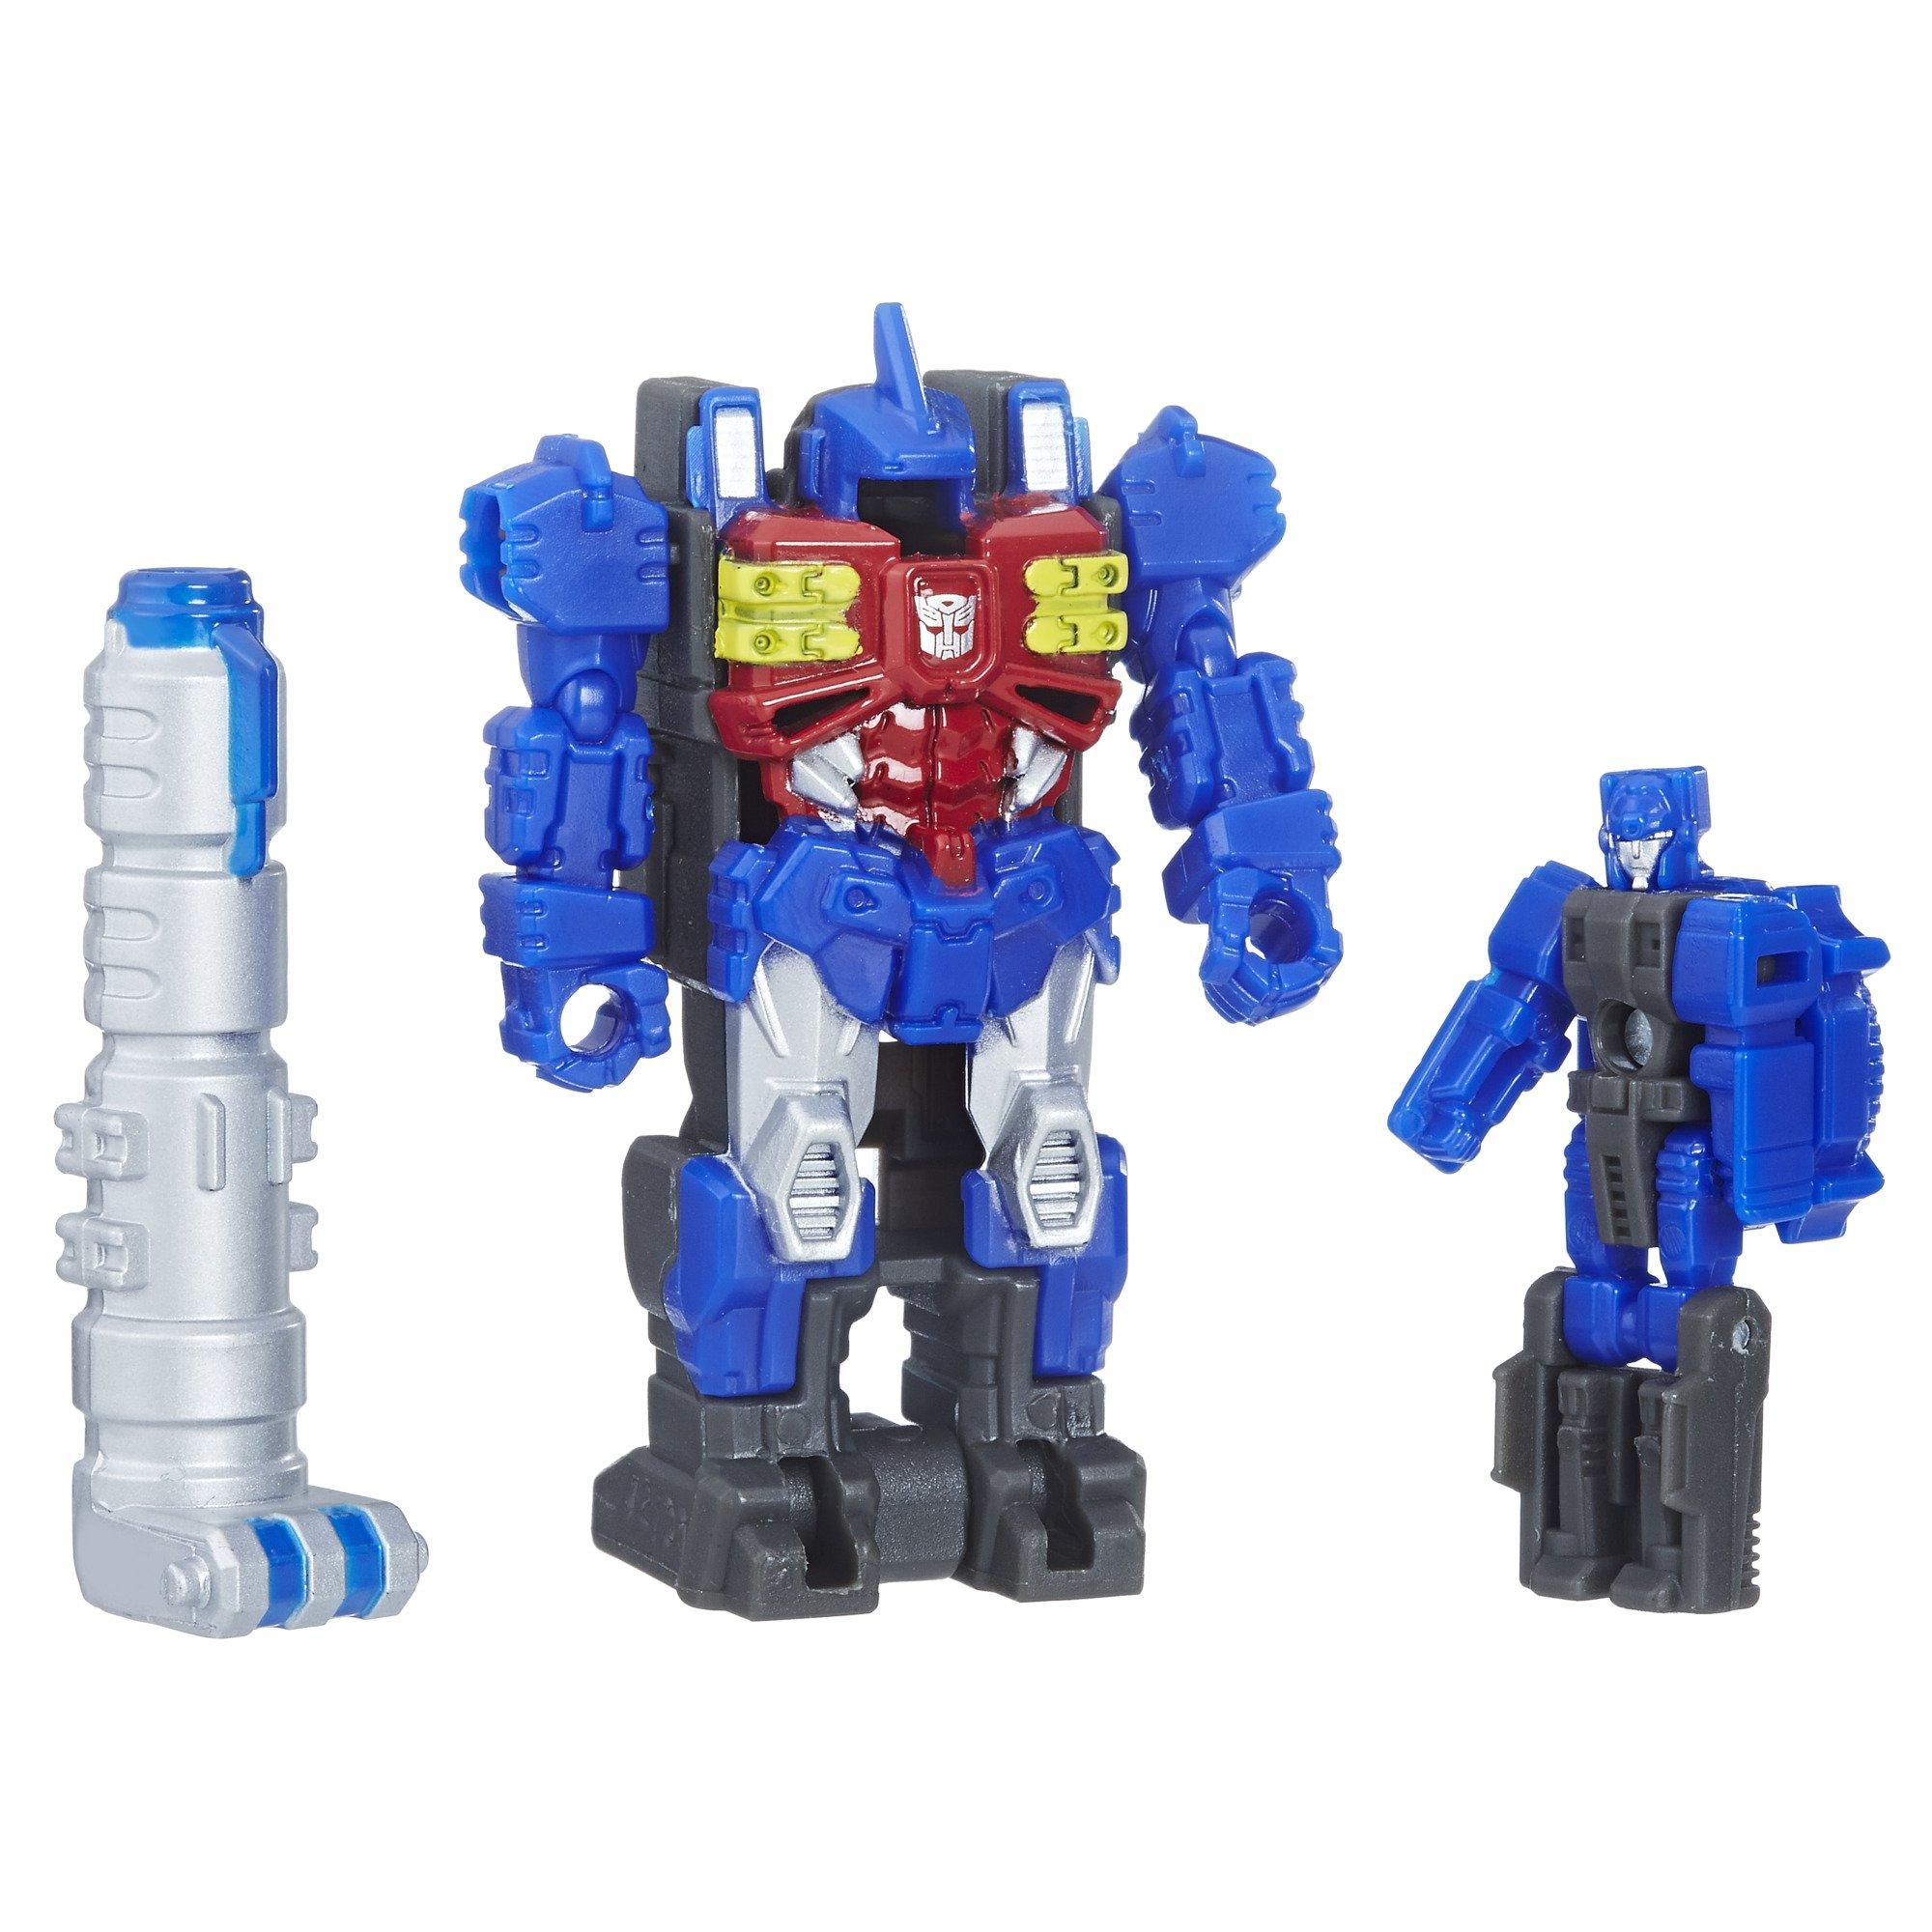 Transformers: Generations Power of the Primes Prime Master Action Figure (Assortment)